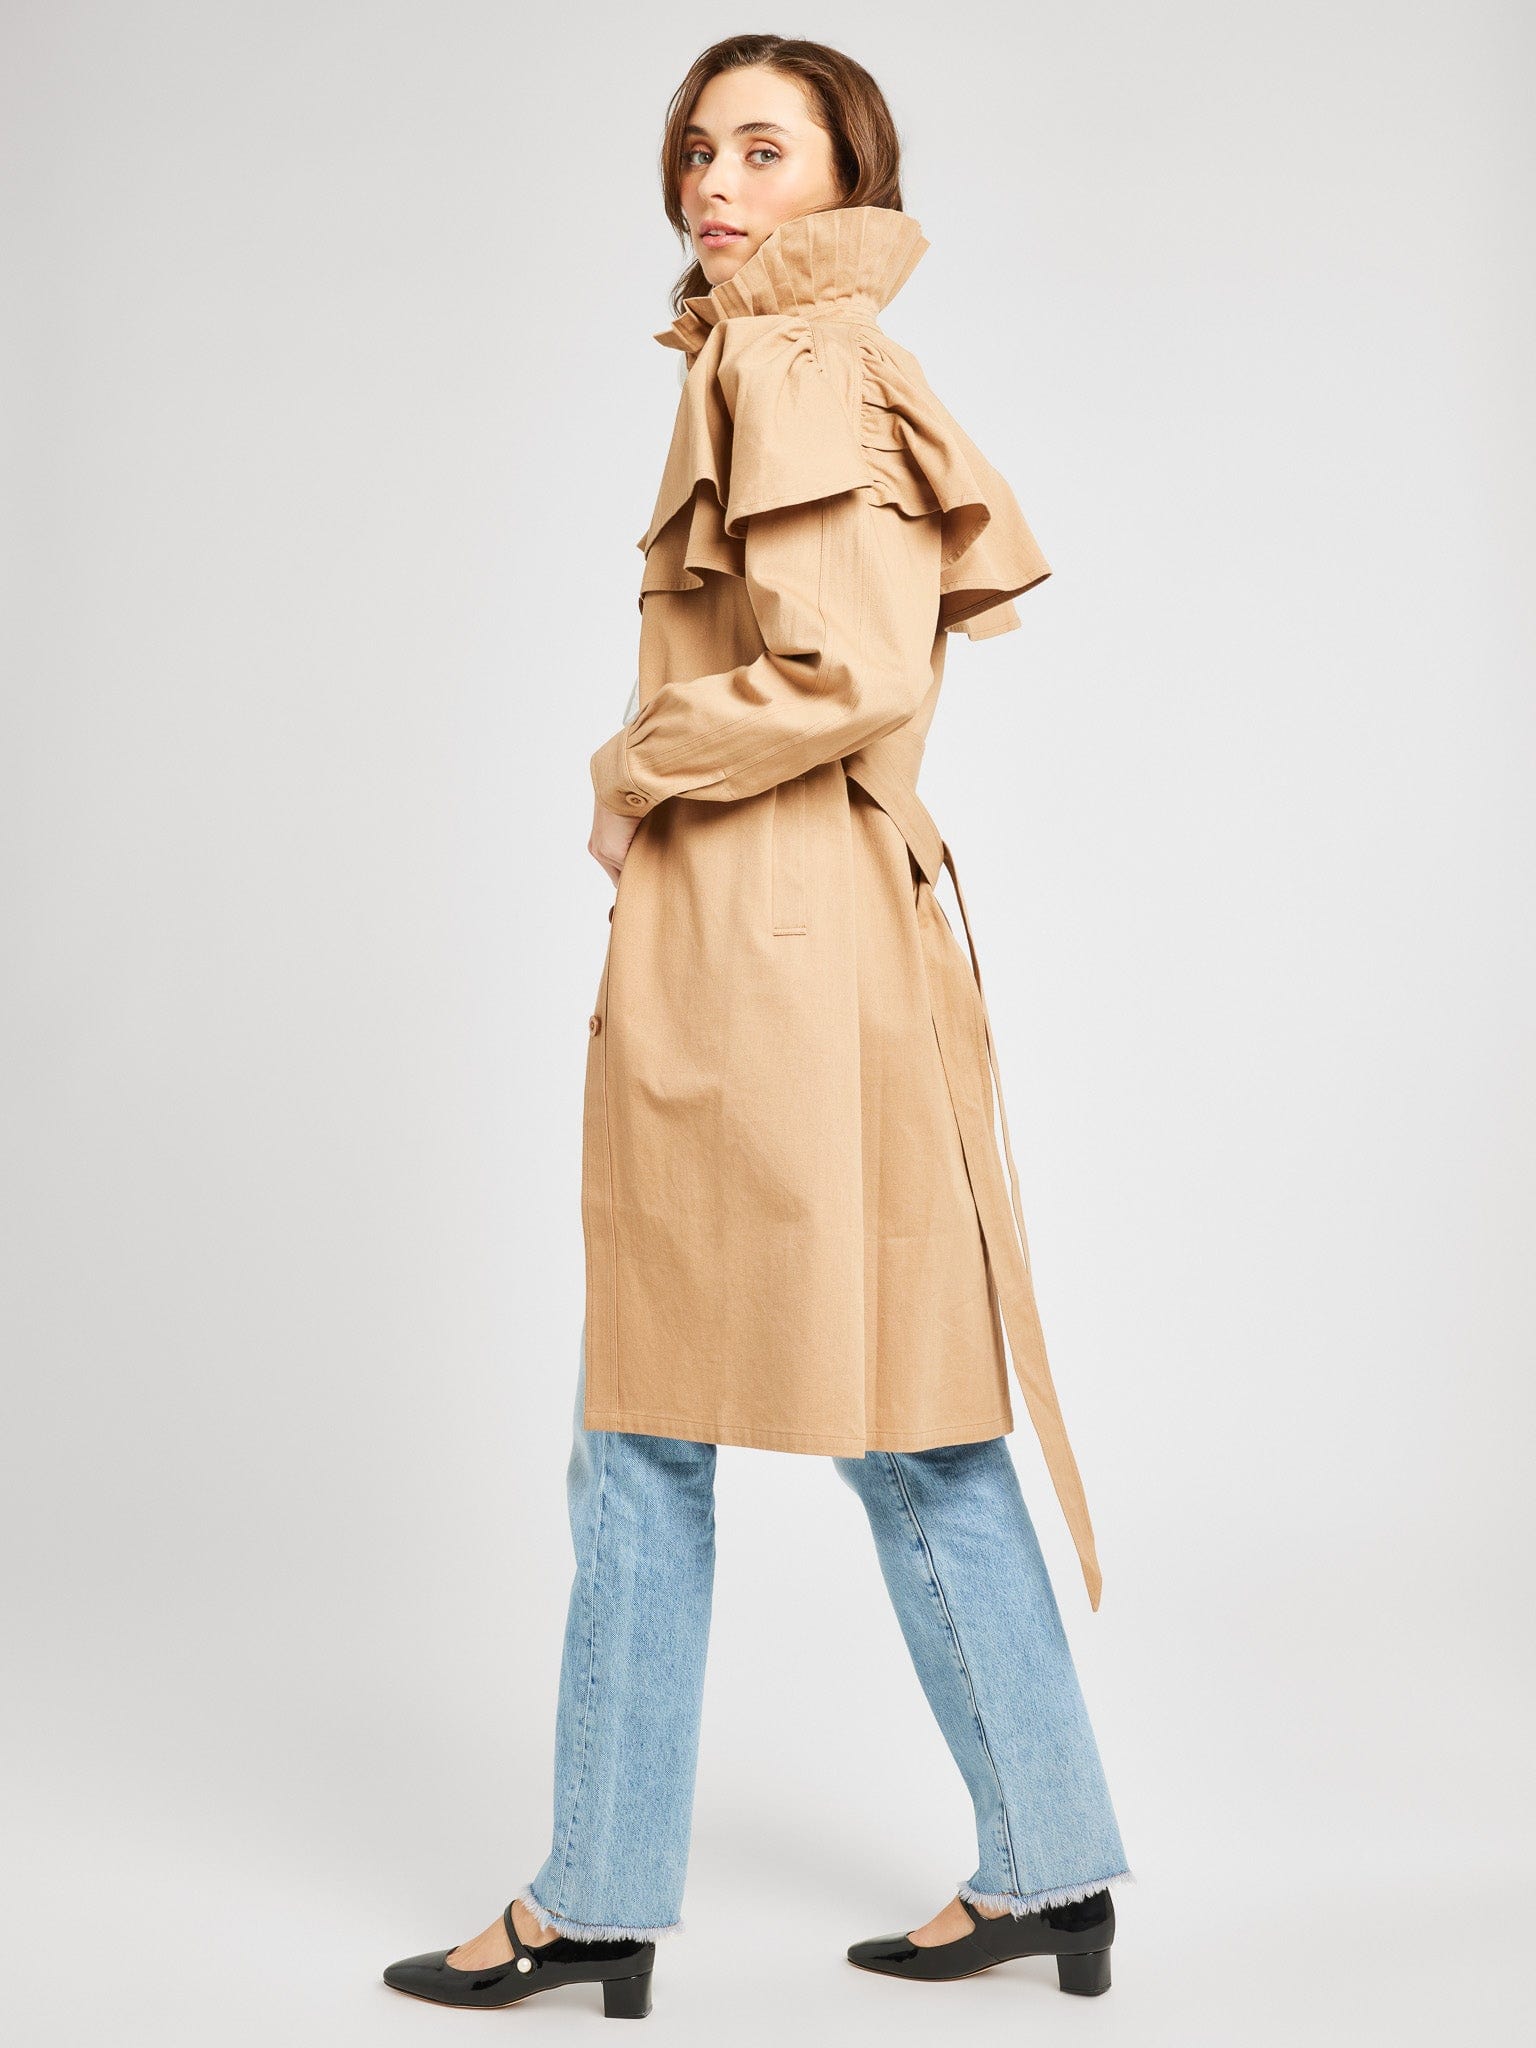 MILLE Clothing Renata Trench in Almond